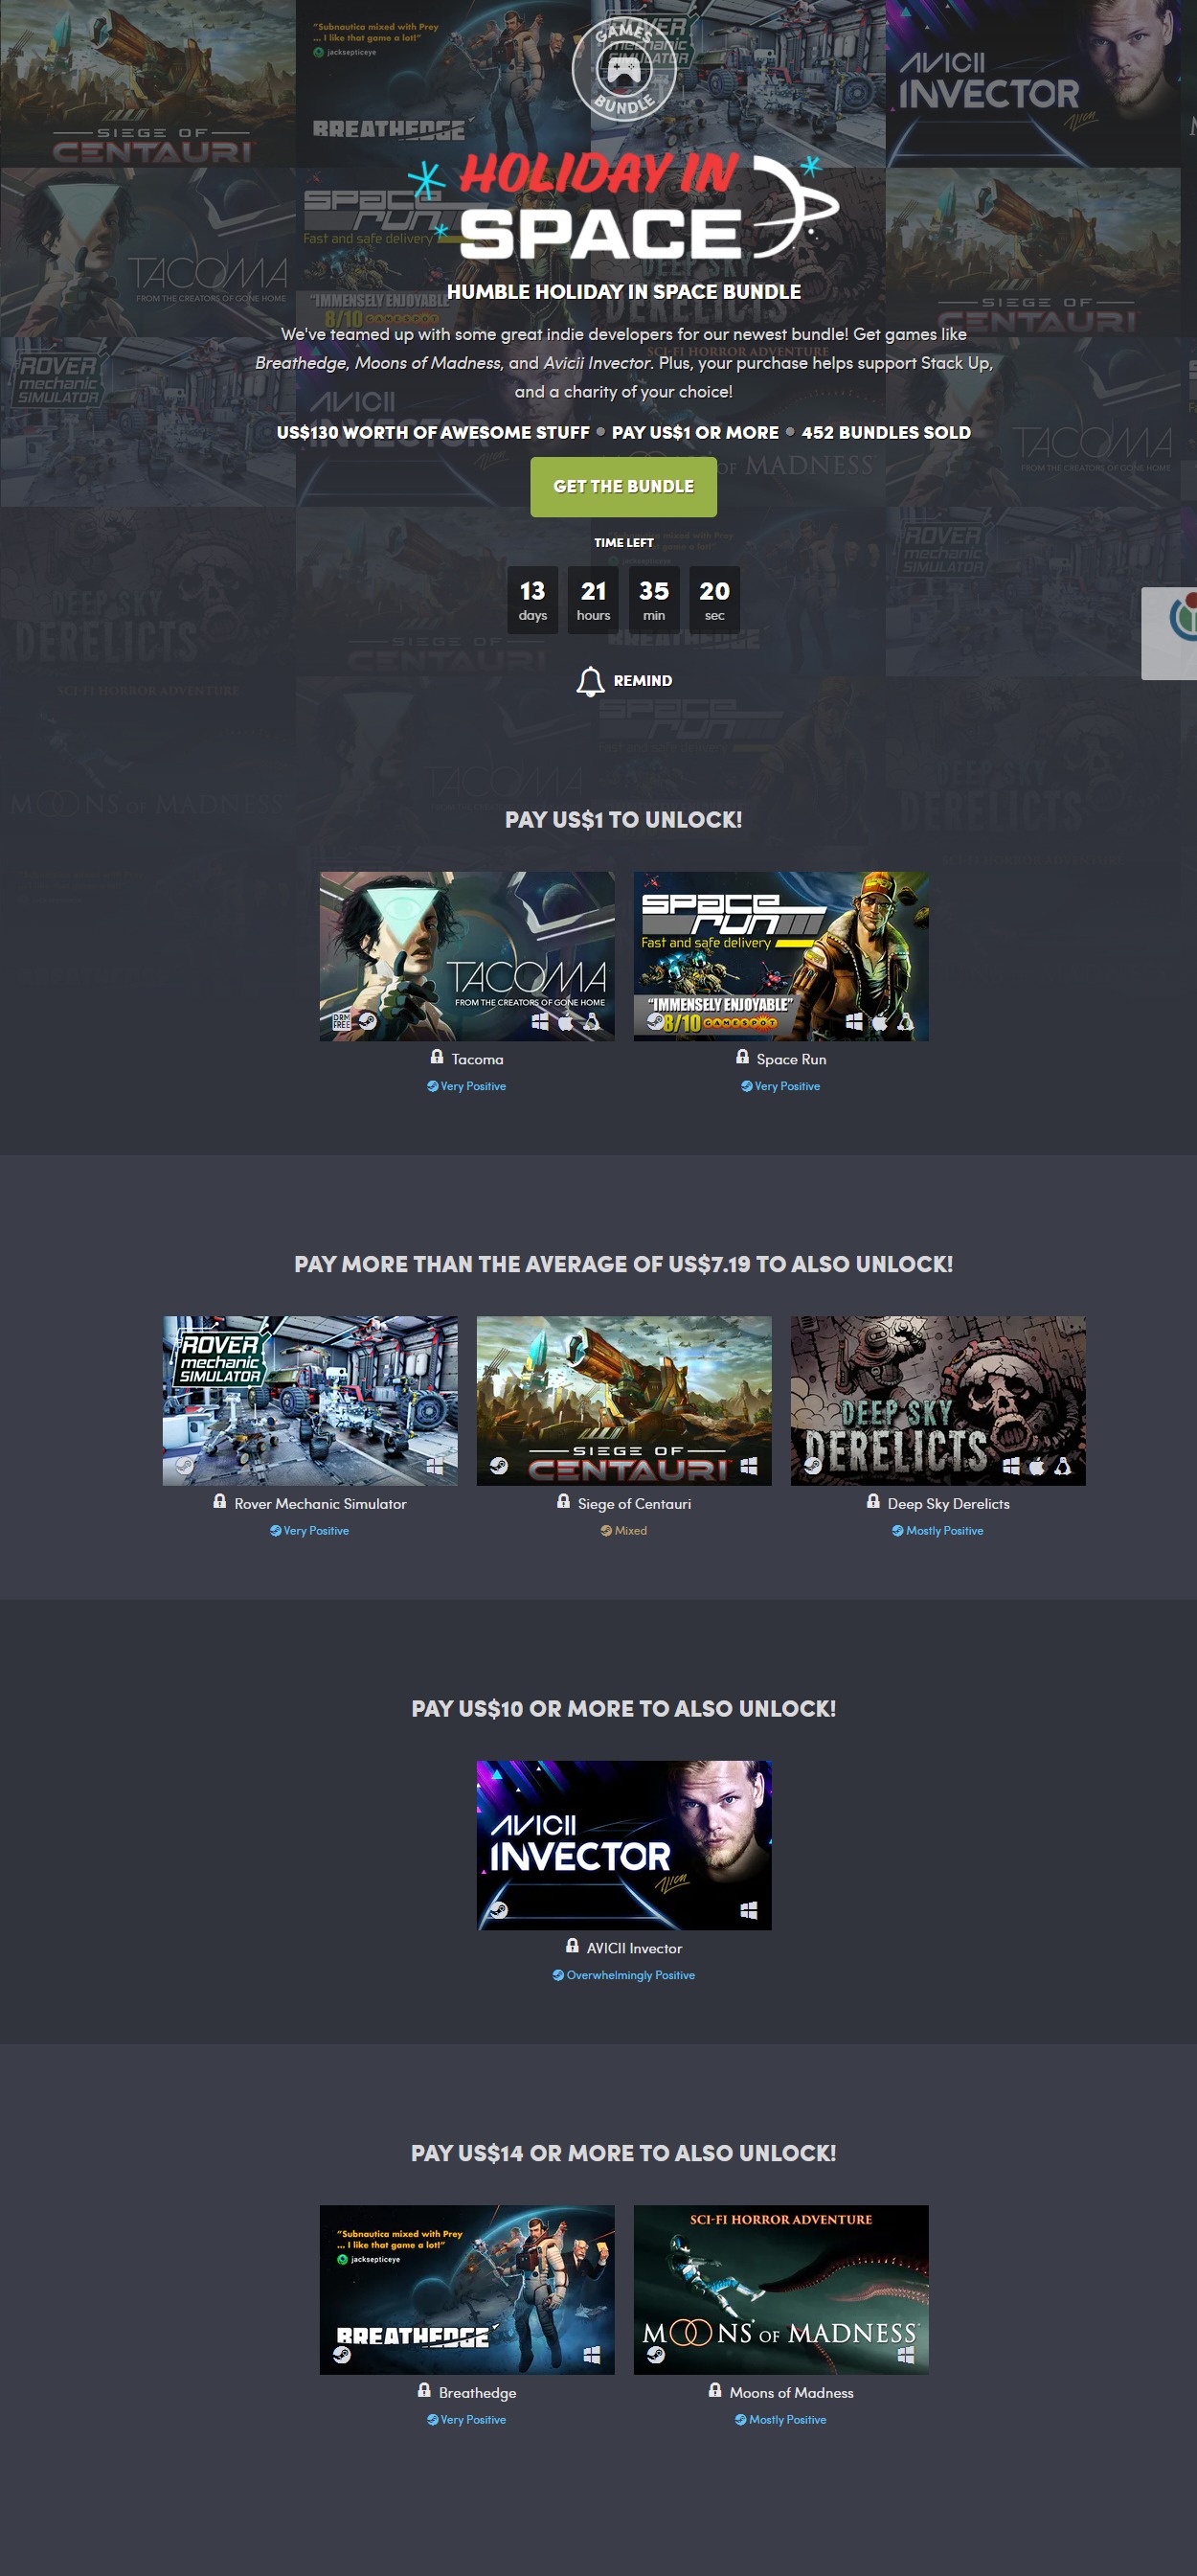 FireShot Capture 169 - Humble Holiday in Space Bundle (pay what you want and help charity)_ - www.humblebundle.com.jpg